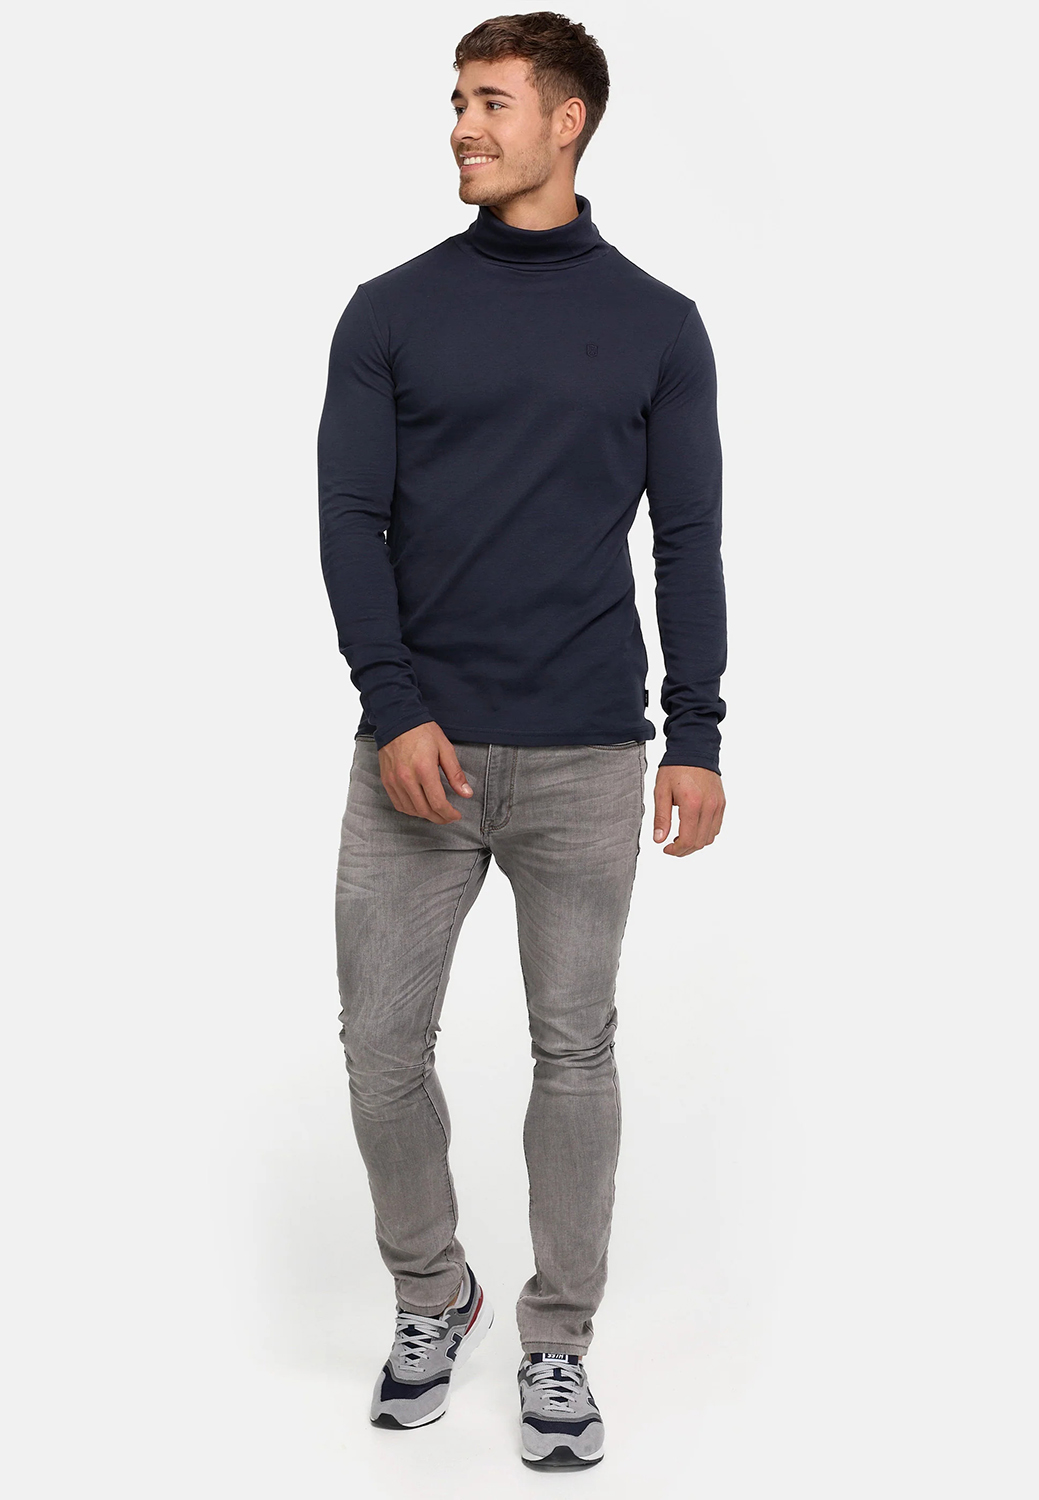 Navy turtleneck, gray jeans, athletic gray shoes outfit